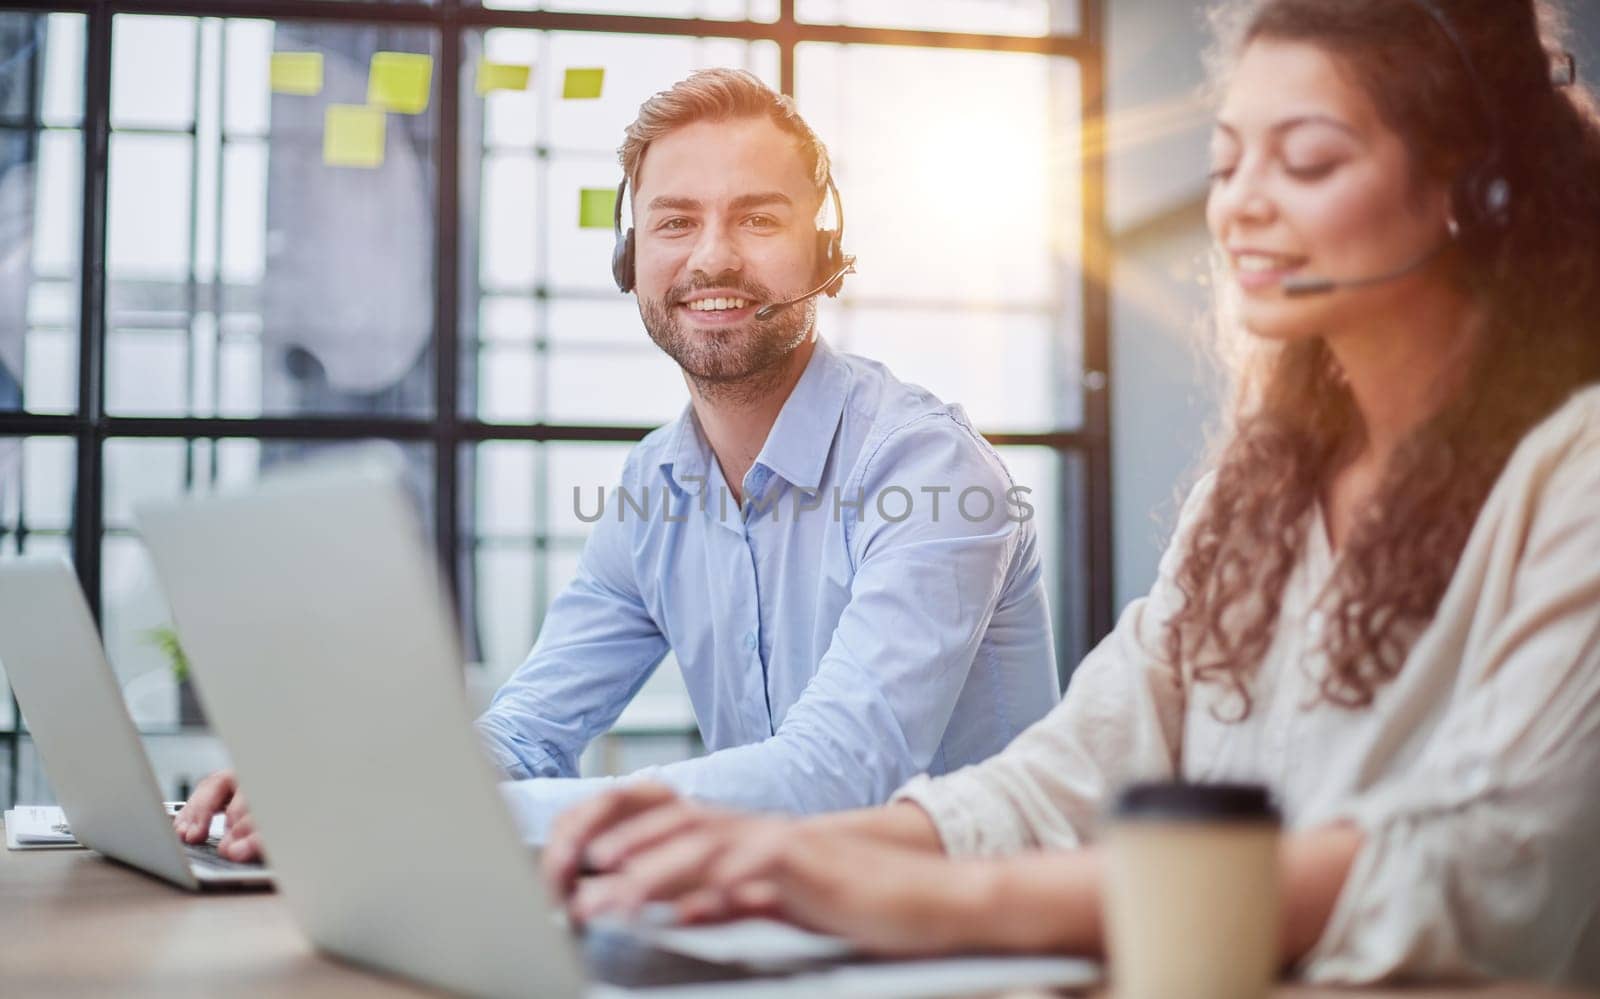 Customer Service Representative With Colleague Working In Office